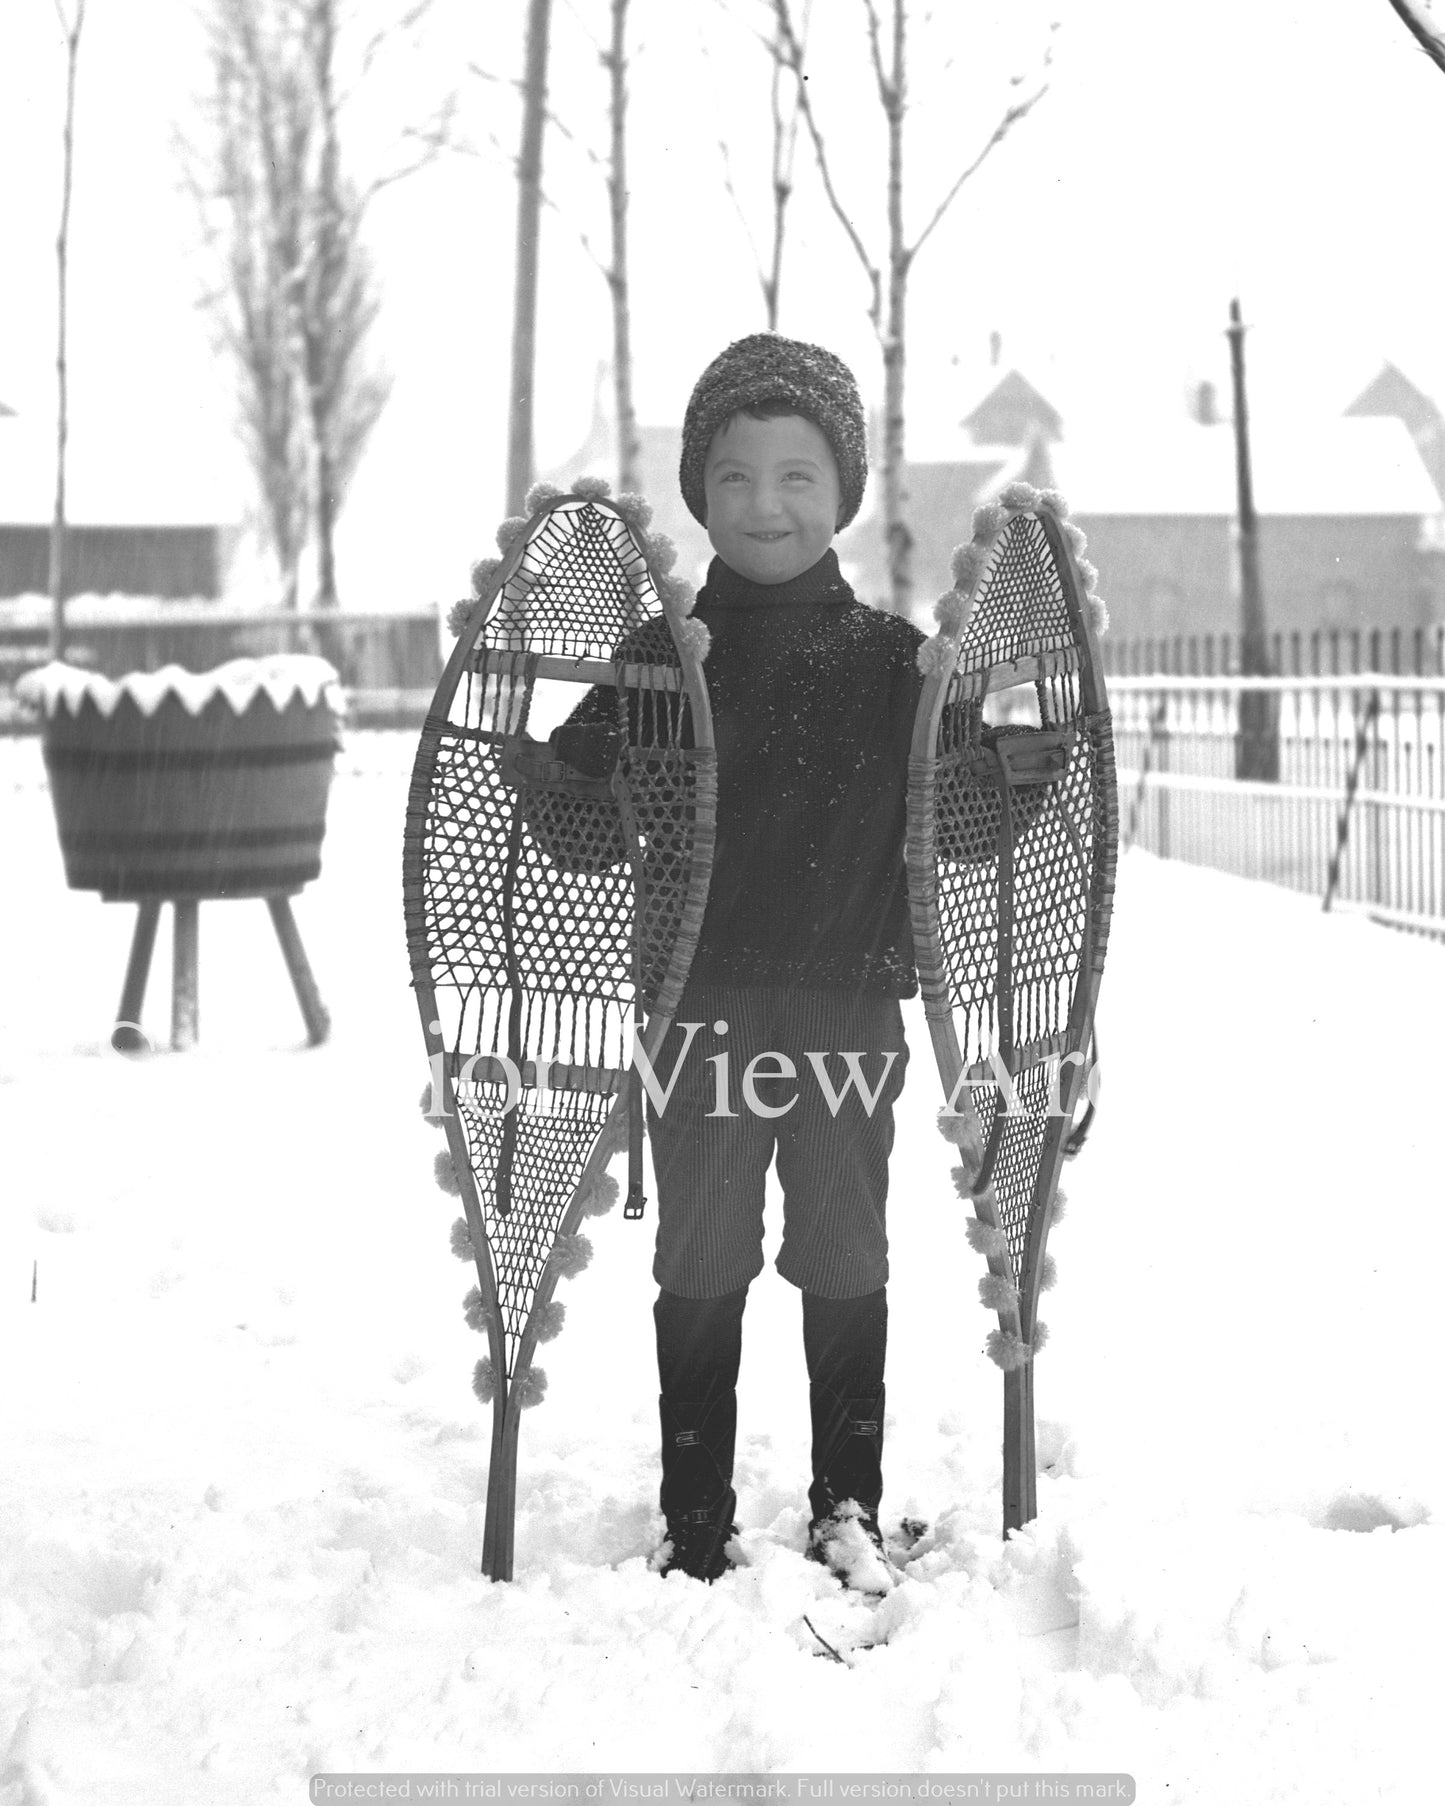 Young Boy Posing with Snowshoes